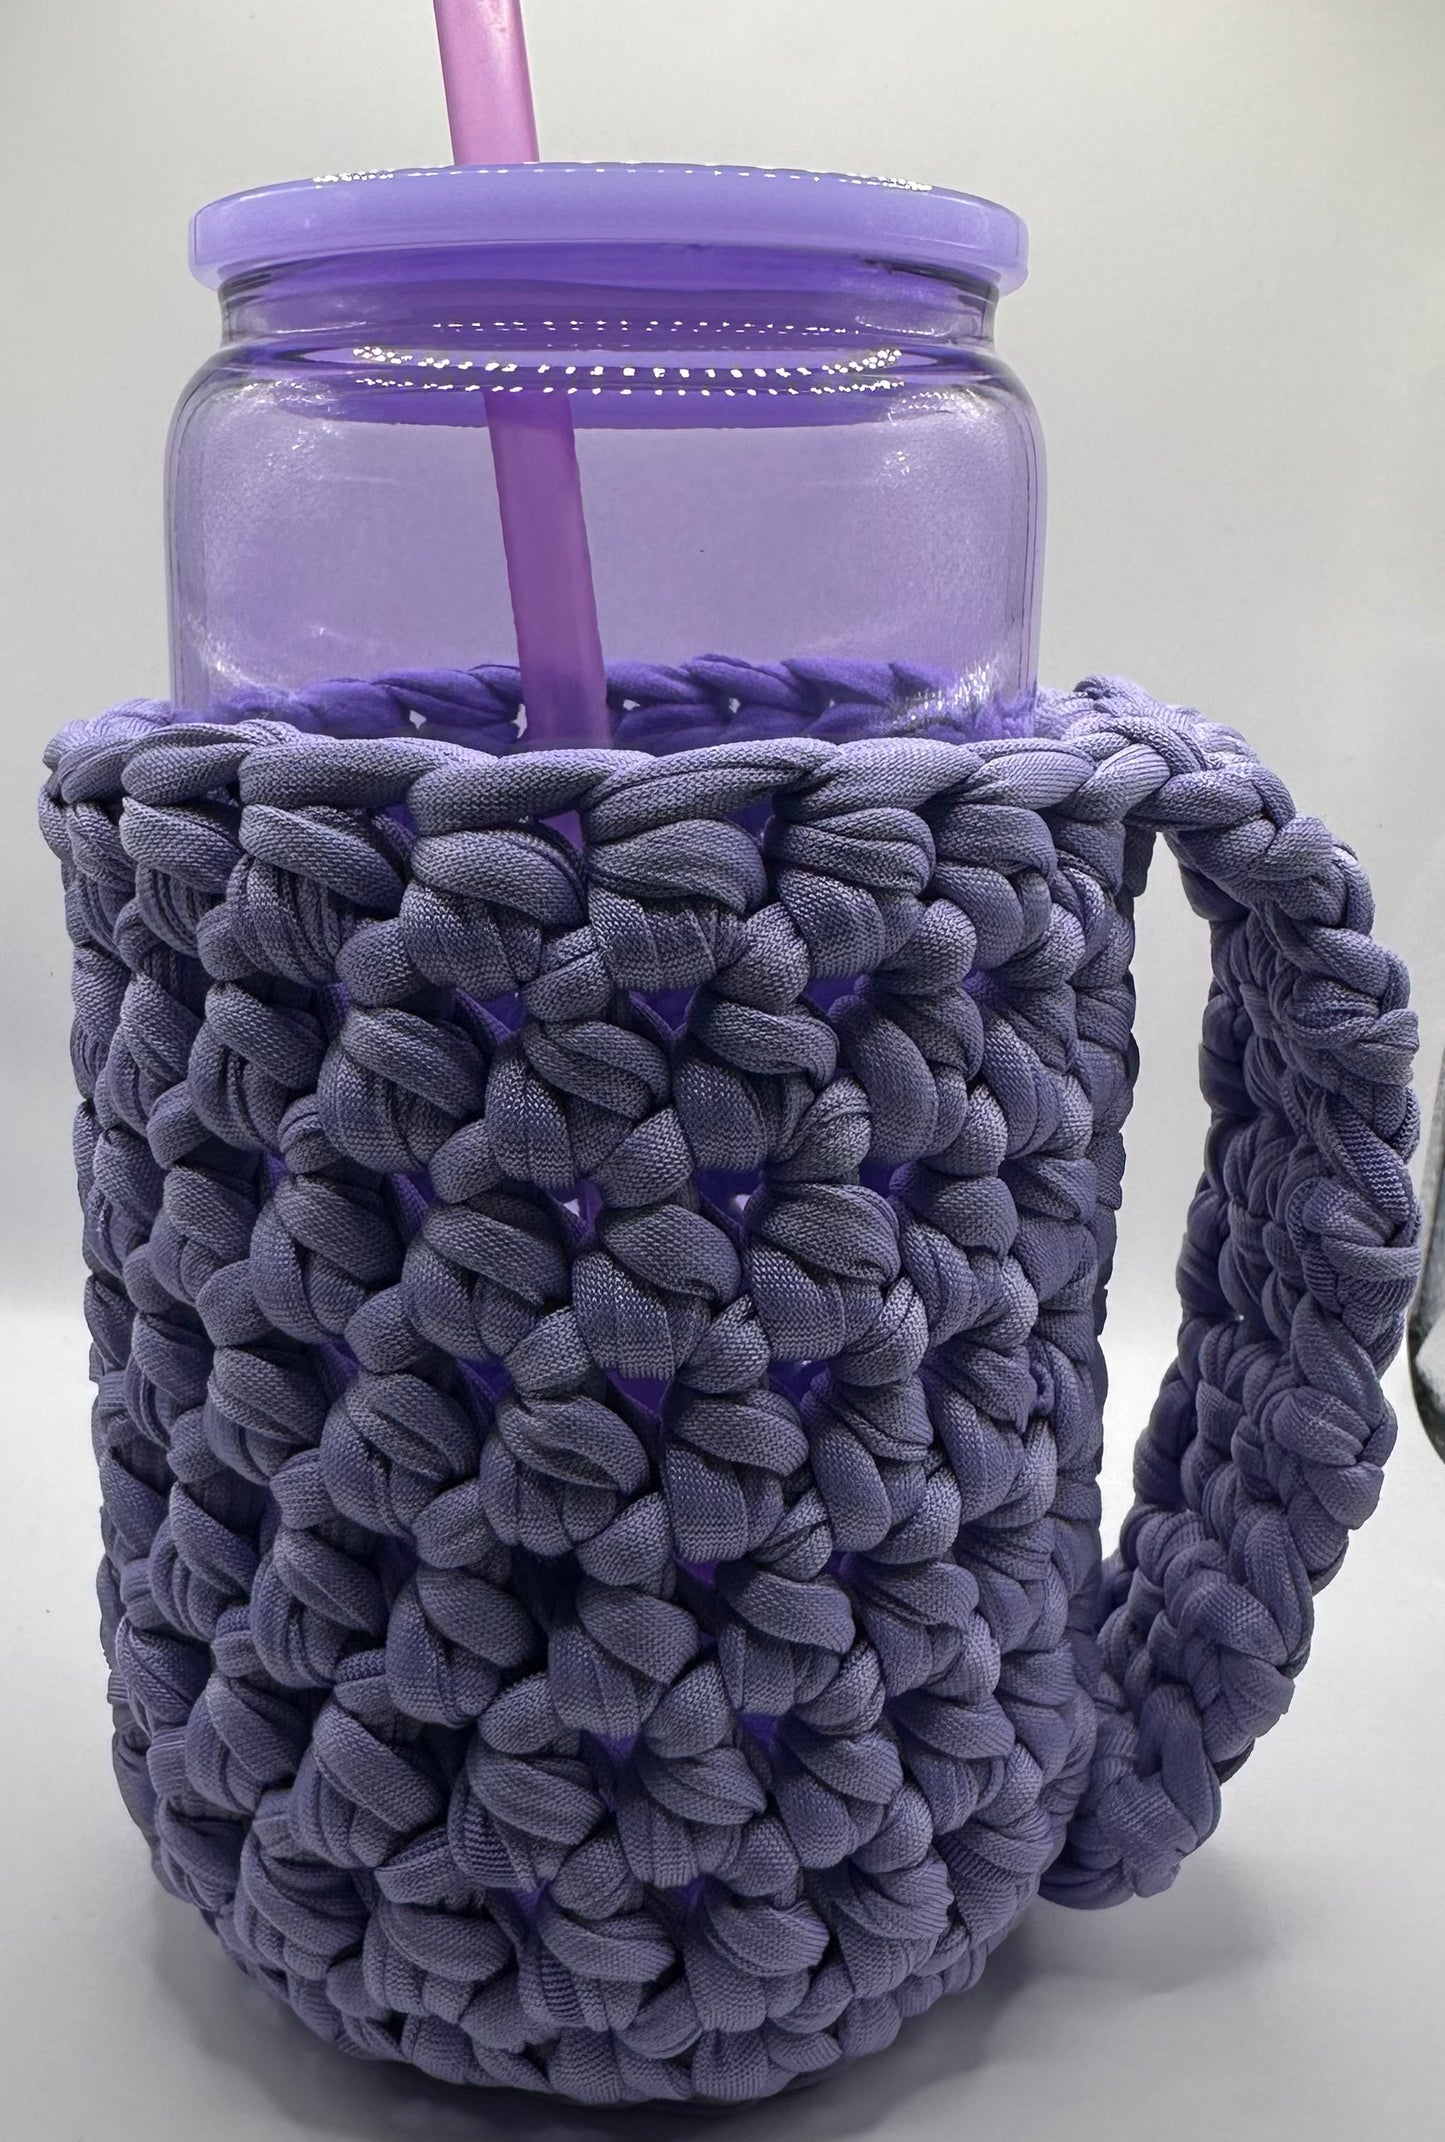 PiNKx Crochet Iced Coffee Cozy fits most iced coffee cups cans, and water bottles